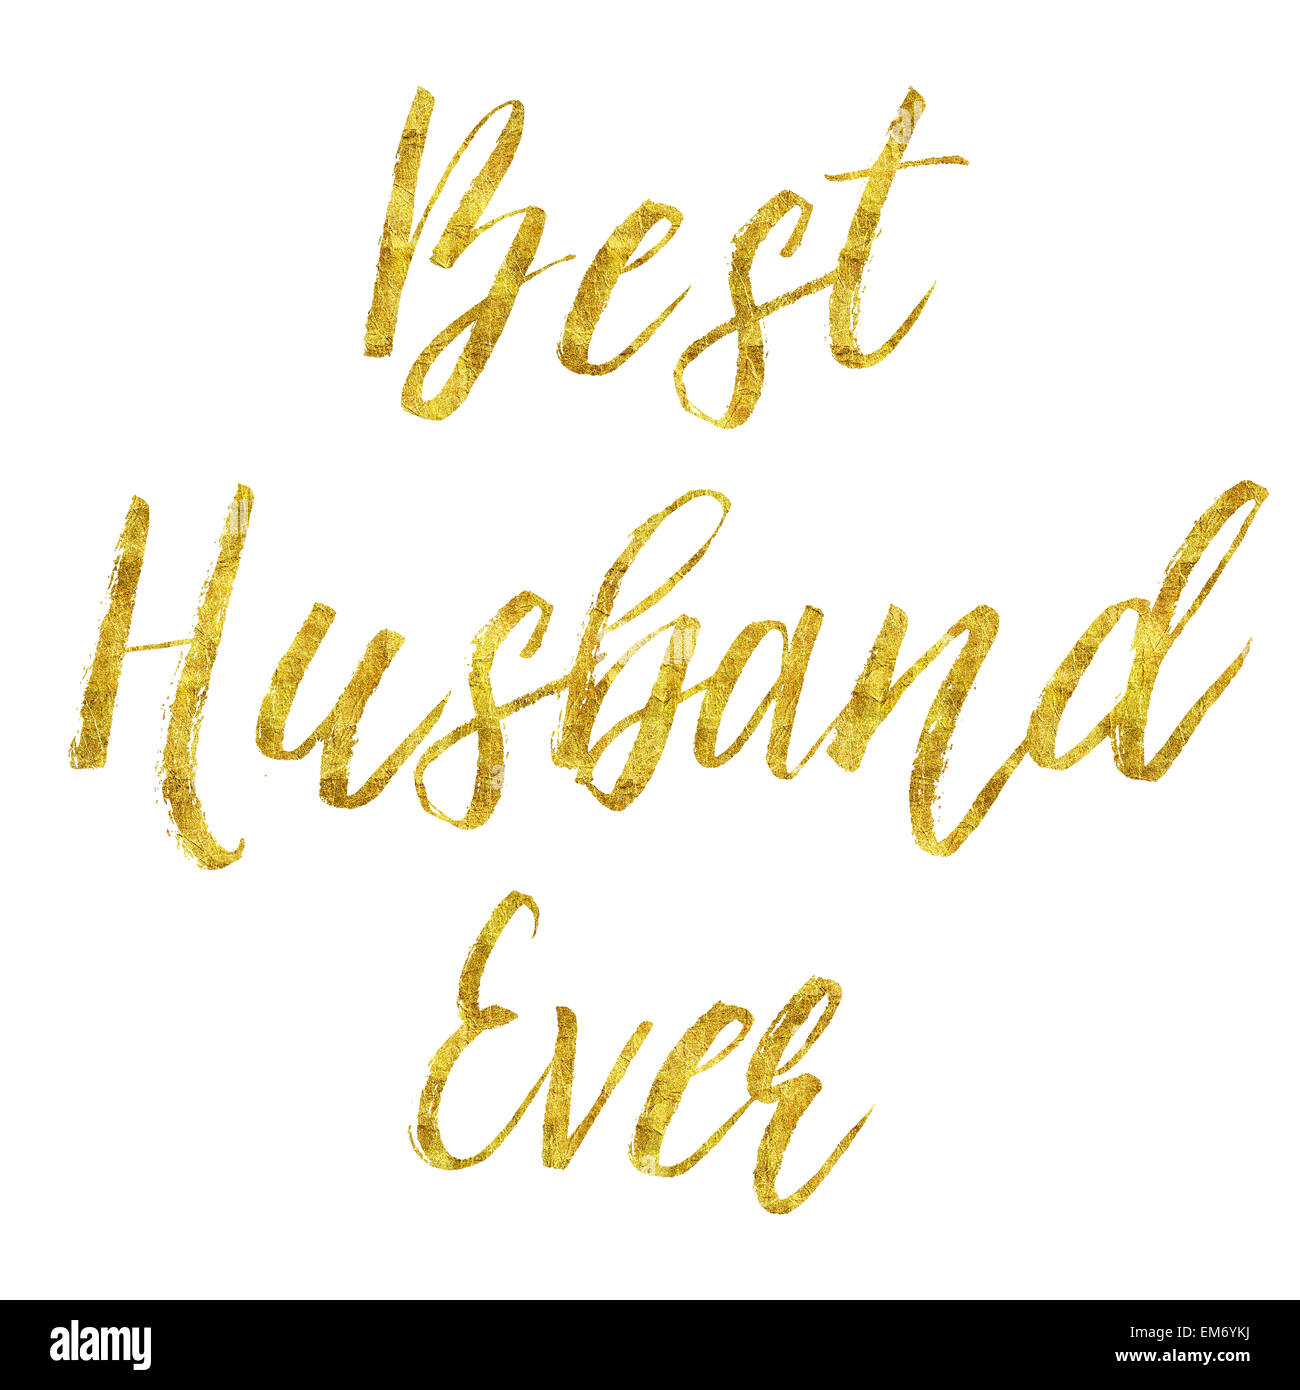 Best Husband Gold Faux Foil Metallic Glitter Quote Isolated on White Background Stock Photo